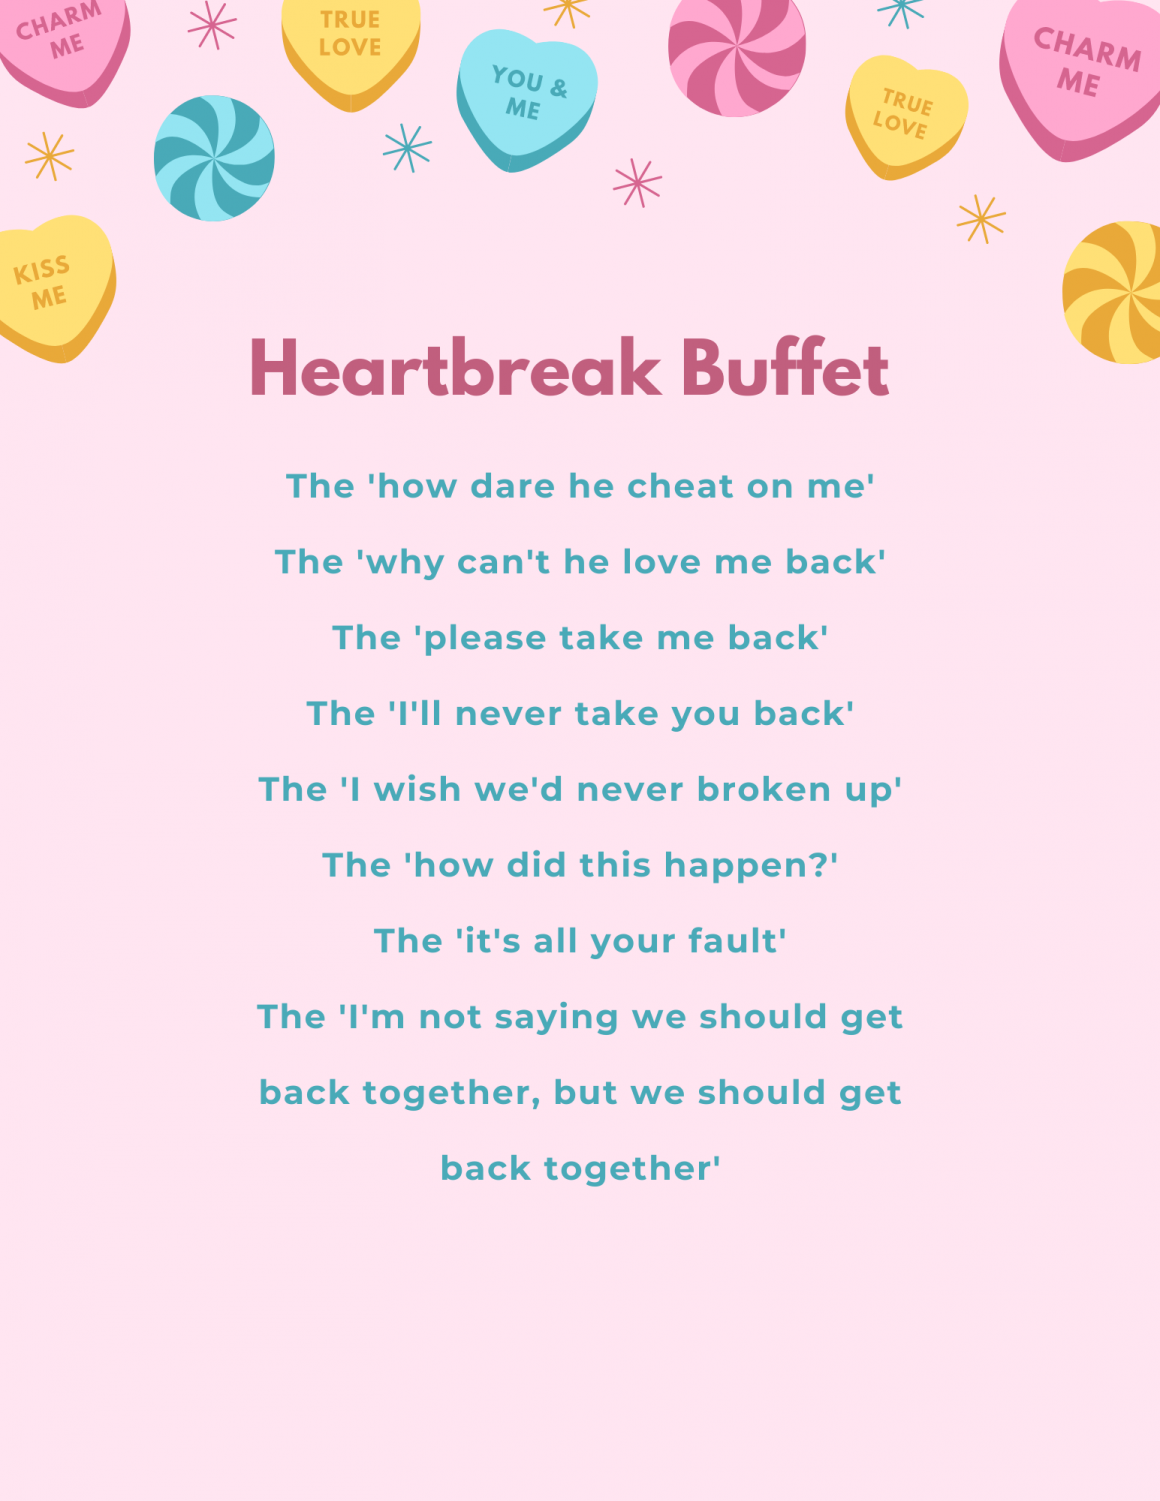 Potential Breakup Song - Wikipedia